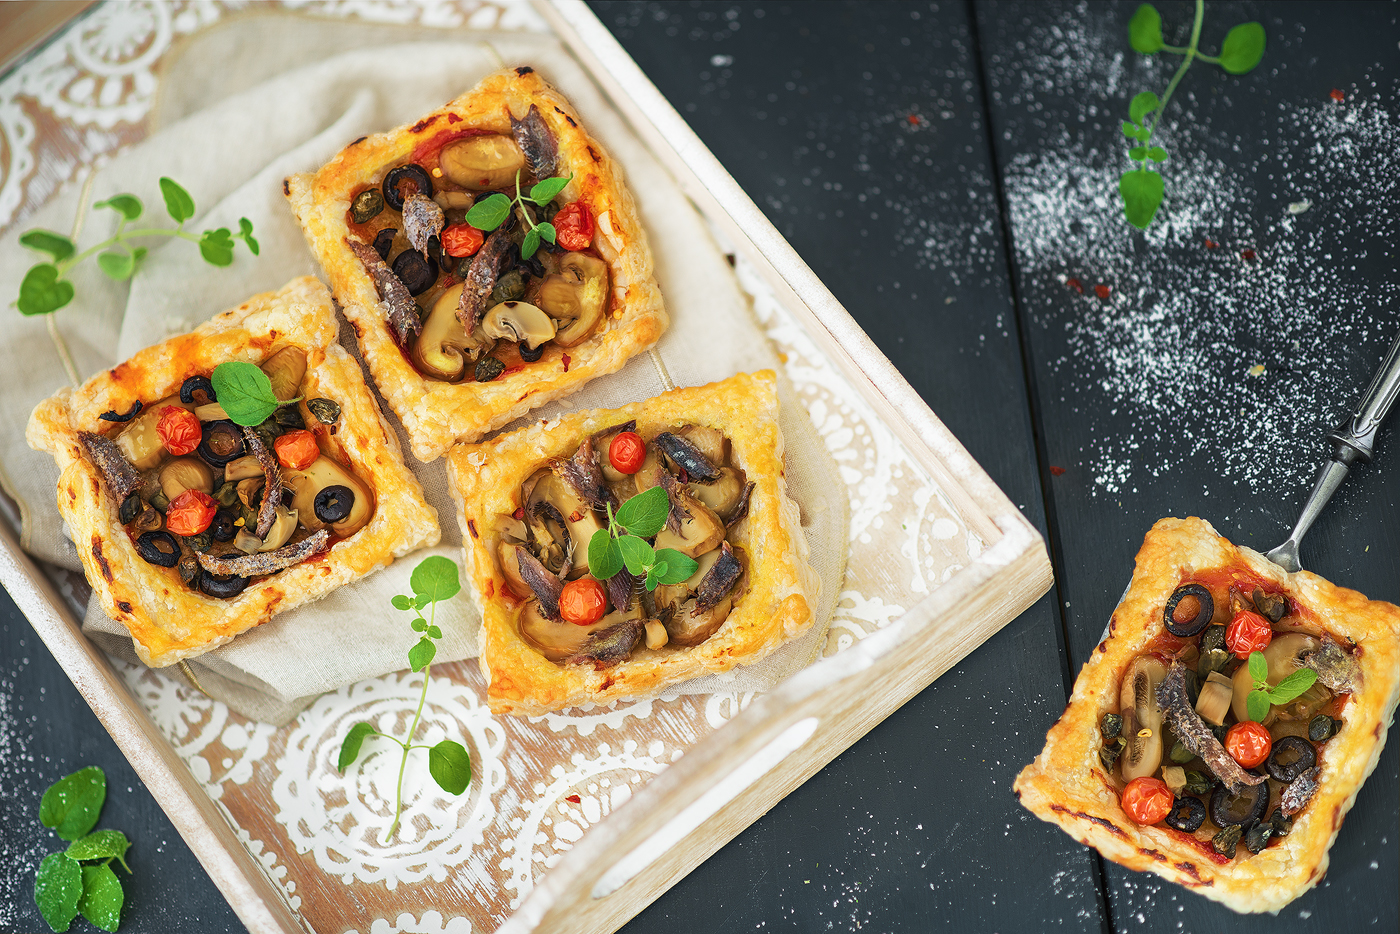 Rolled puff pastry with vegetables and anchovies